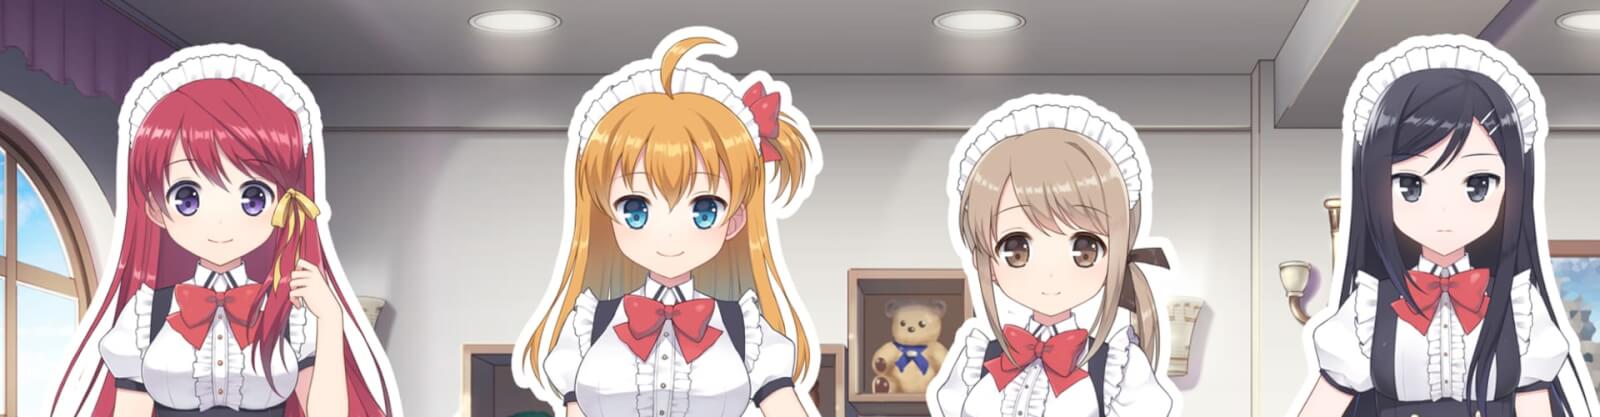 Game set in a maid café that is currently under development